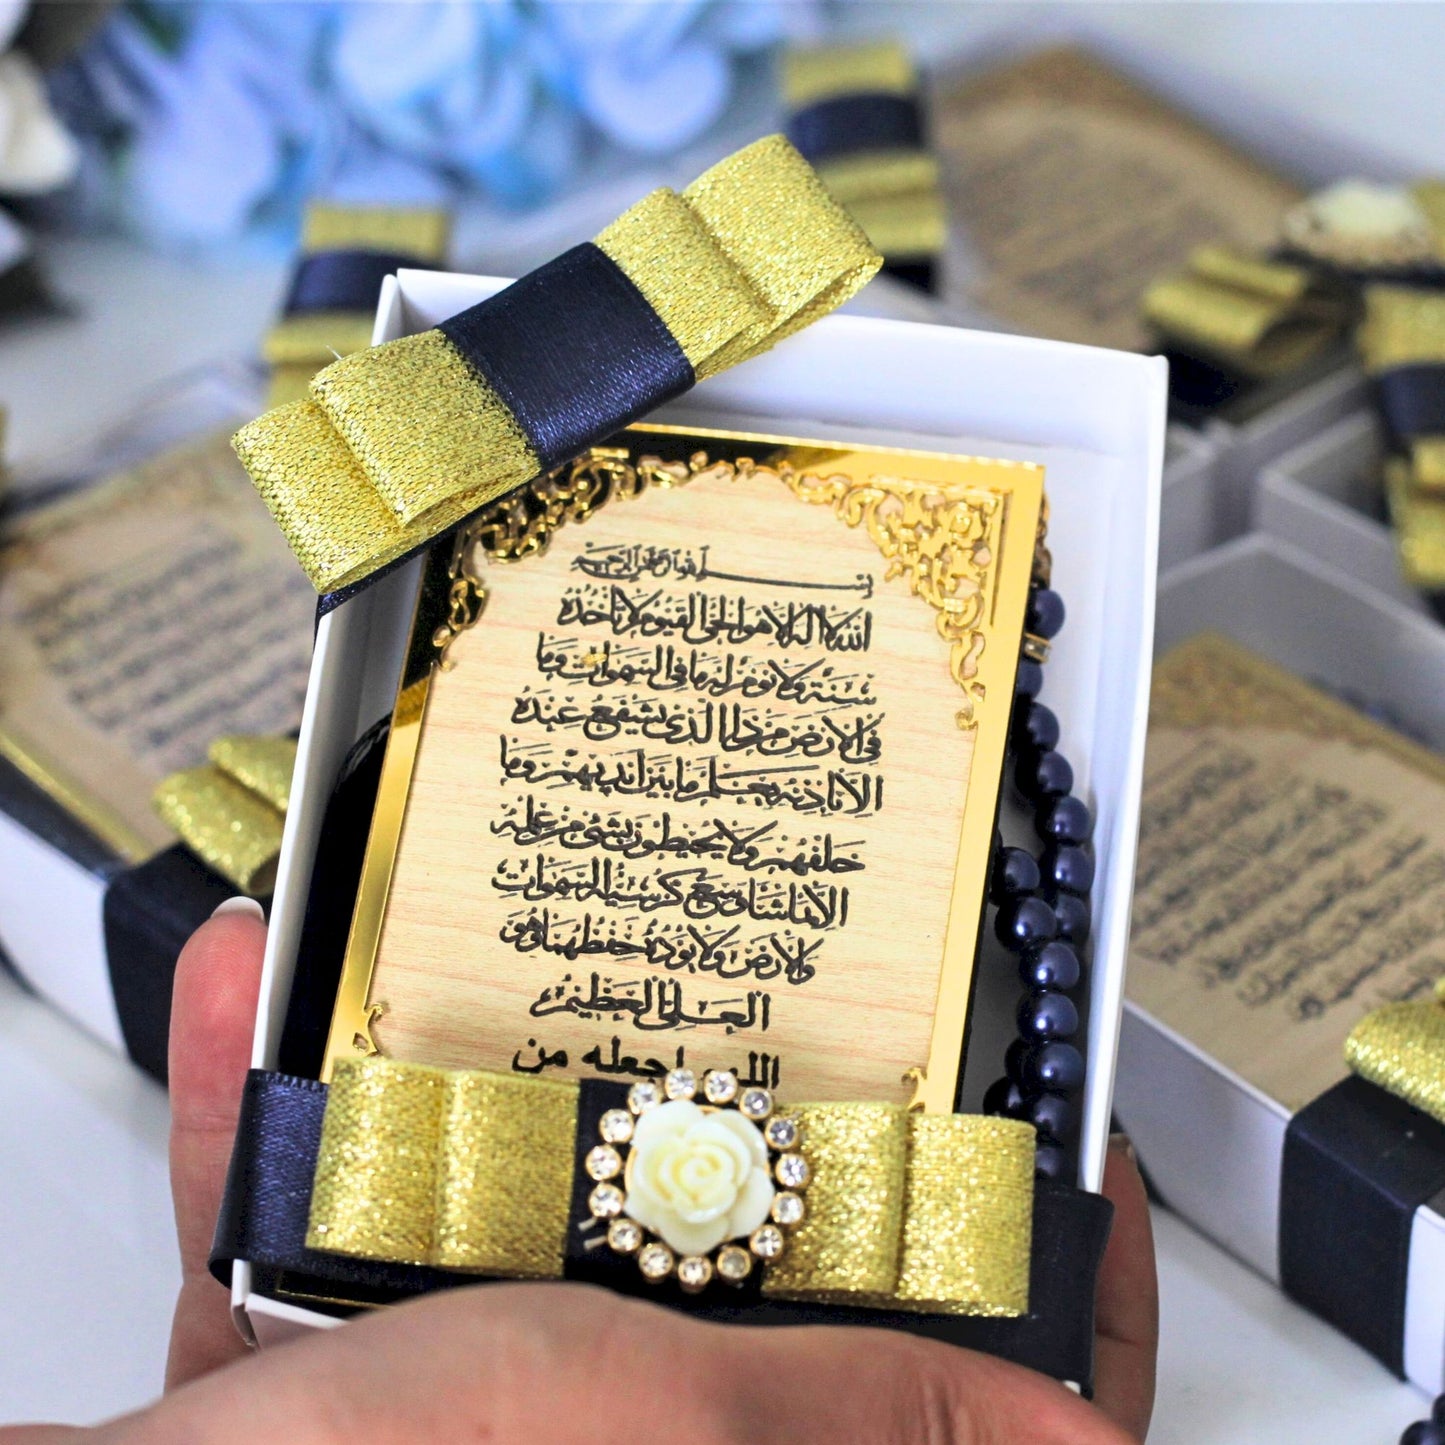 Personalized Wedding Favor Ayatul Kursi on Stand Wood Engraved Tasbeeh - Islamic Elite Favors is a handmade gift shop offering a wide variety of unique and personalized gifts for all occasions. Whether you're looking for the perfect Ramadan, Eid, Hajj, wedding gift or something special for a birthday, baby shower or anniversary, we have something for everyone. High quality, made with love.